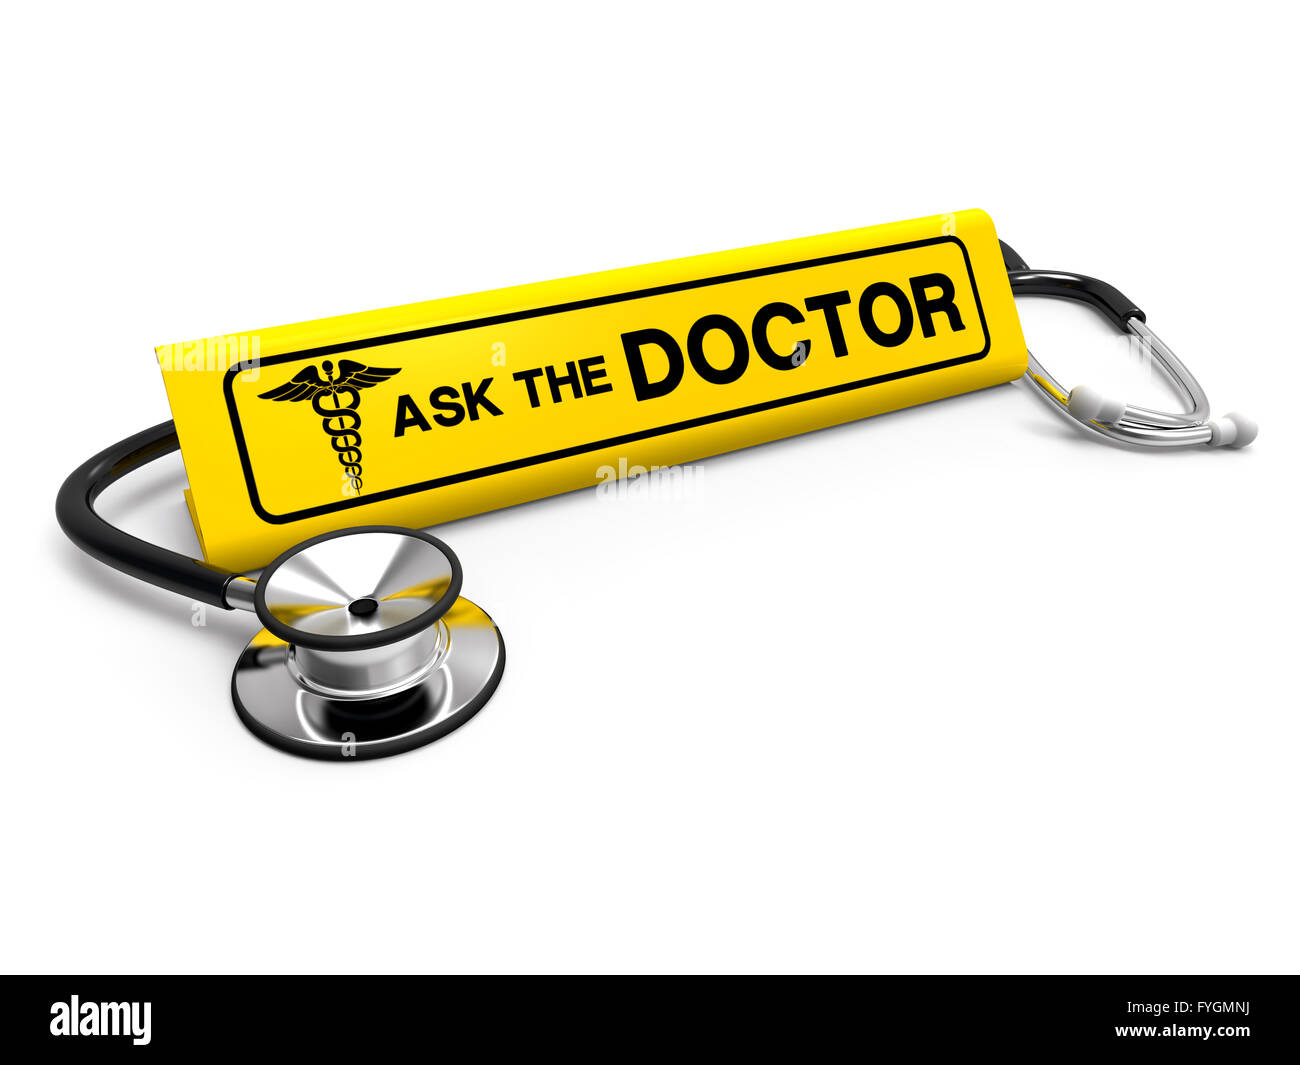 Ask the doctor sign and stethoscope, medical Stock Photo